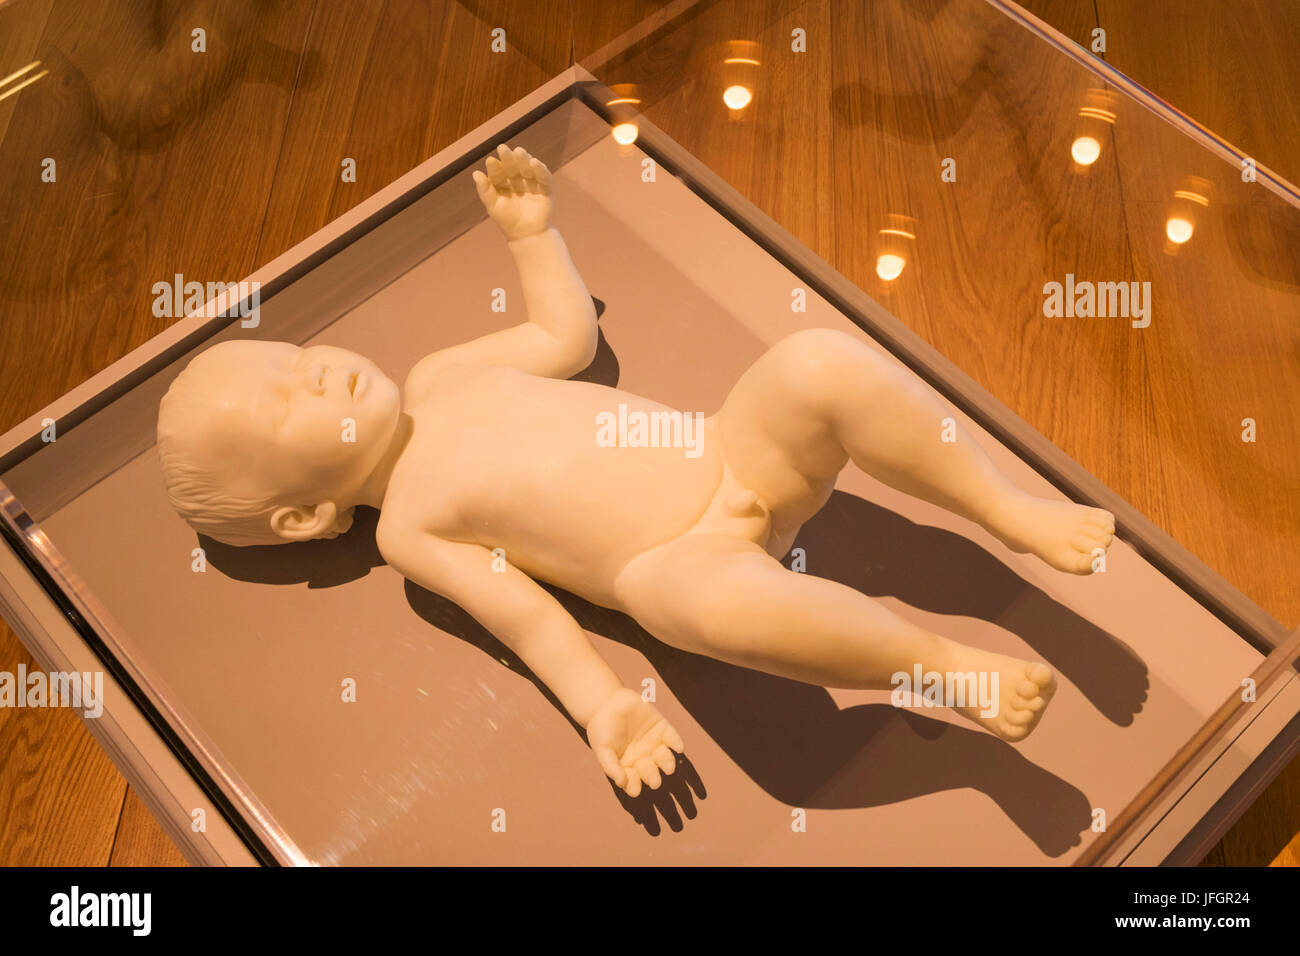 England, London, The Wellcome Collection, The Reading Room, Wax Figure of a Baby titled 'Free' by Marc Quinn 2005 Stock Photo